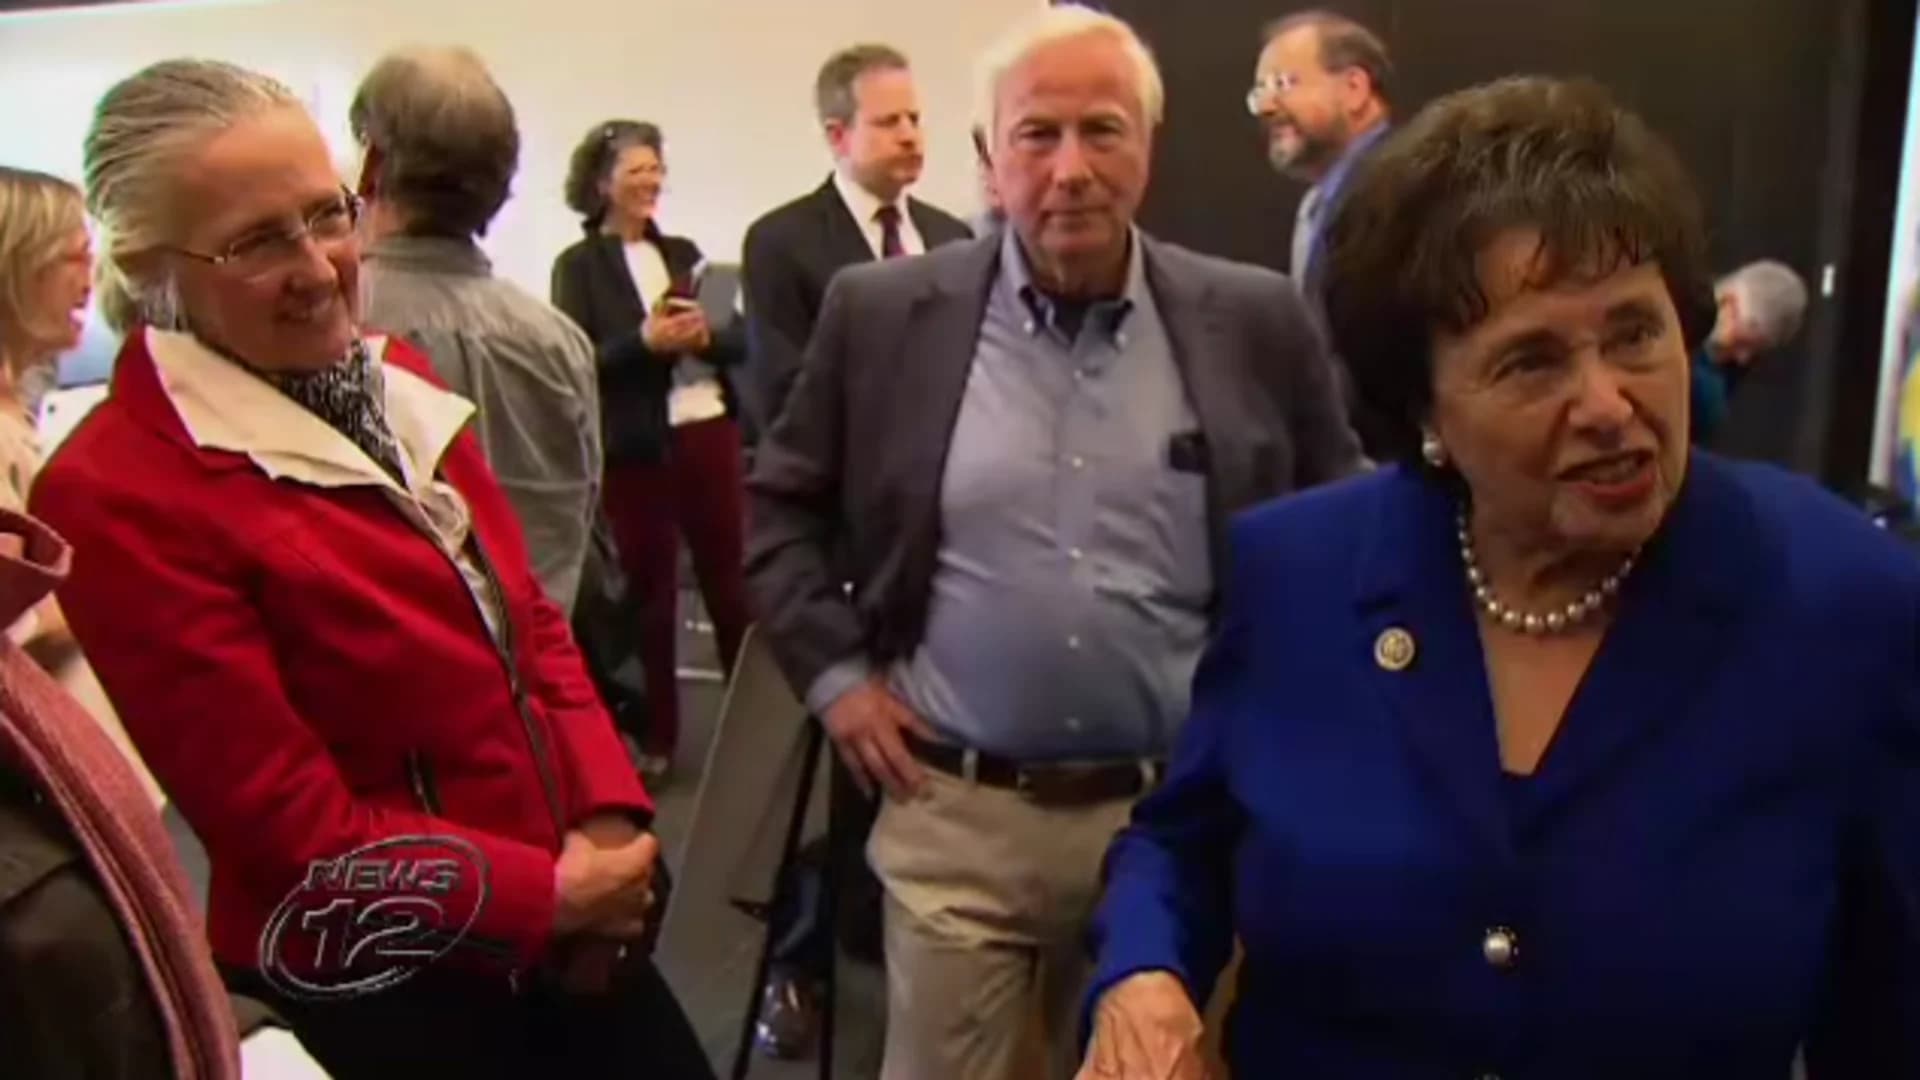 Rep. Lowey meets with scientists to discuss proposed budget cuts